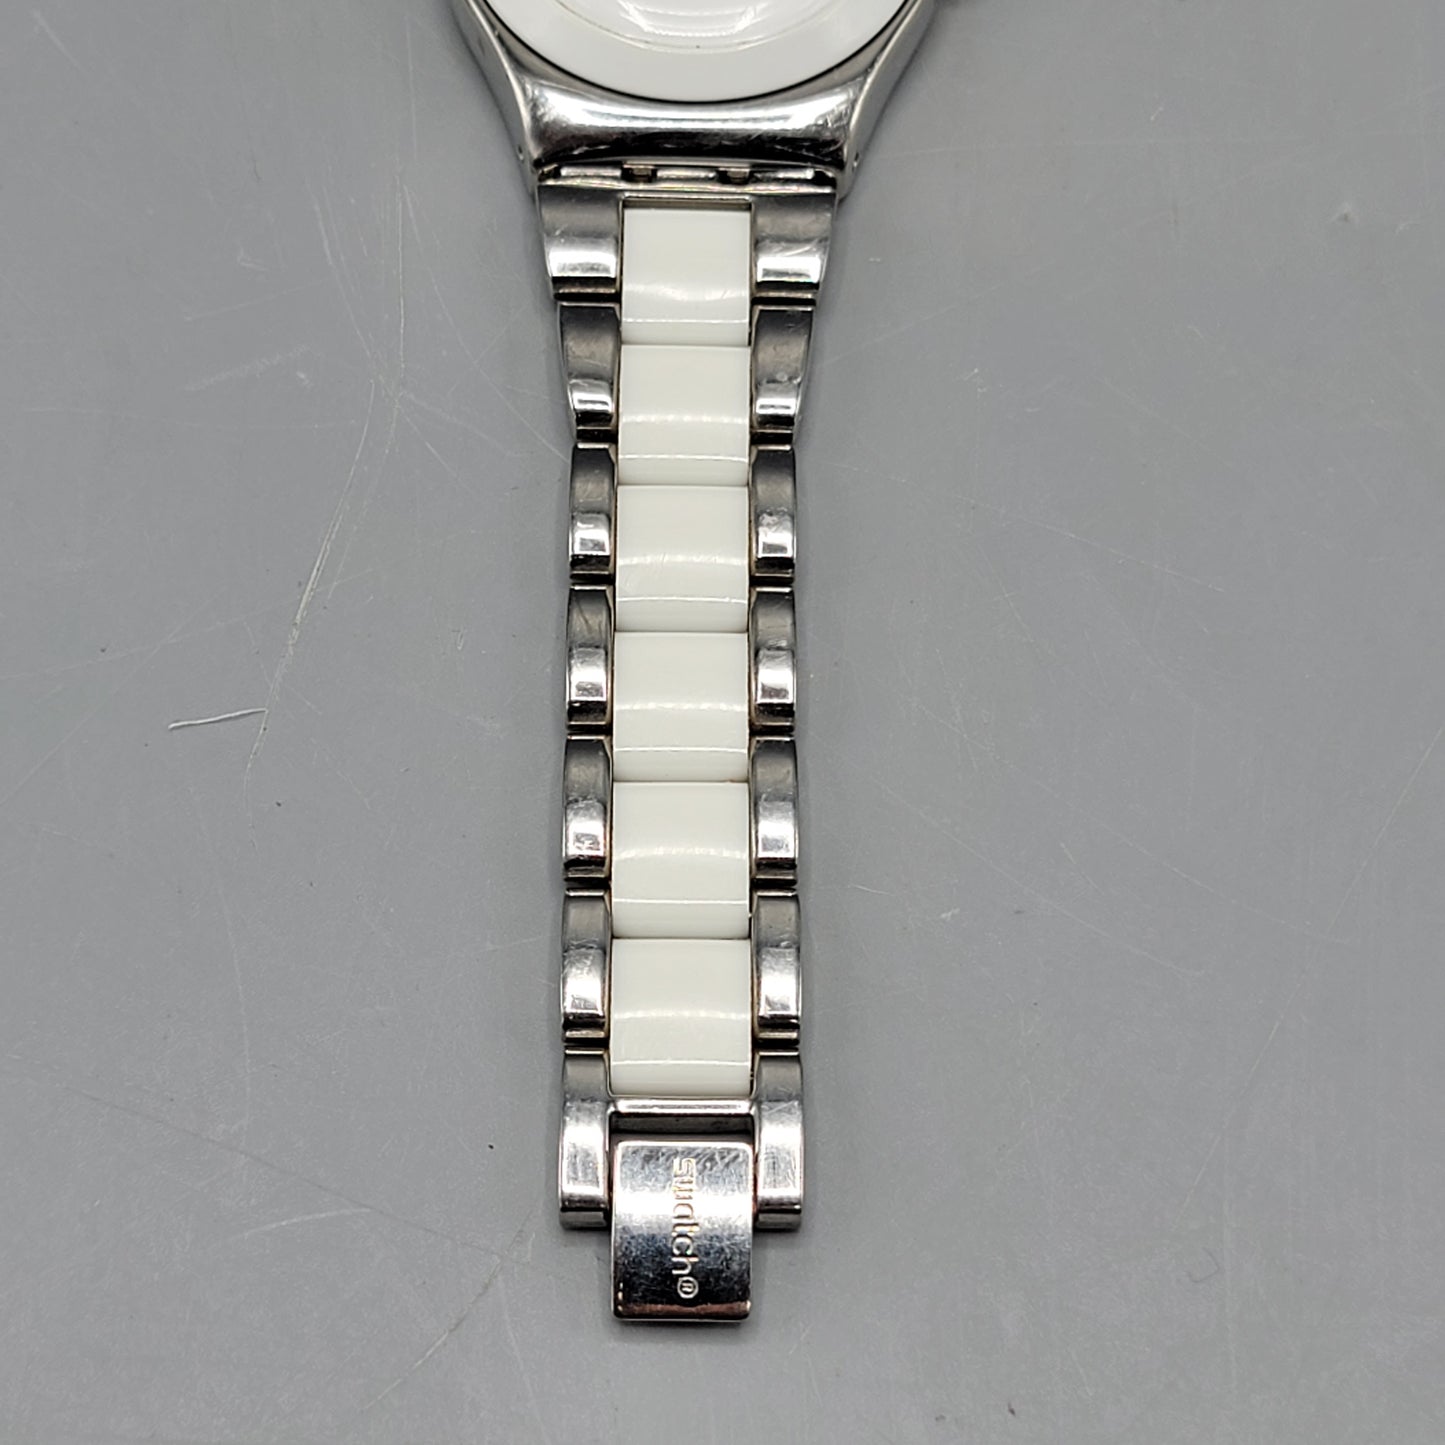 Swatch Irony Quartz Movement Watch with White Dial